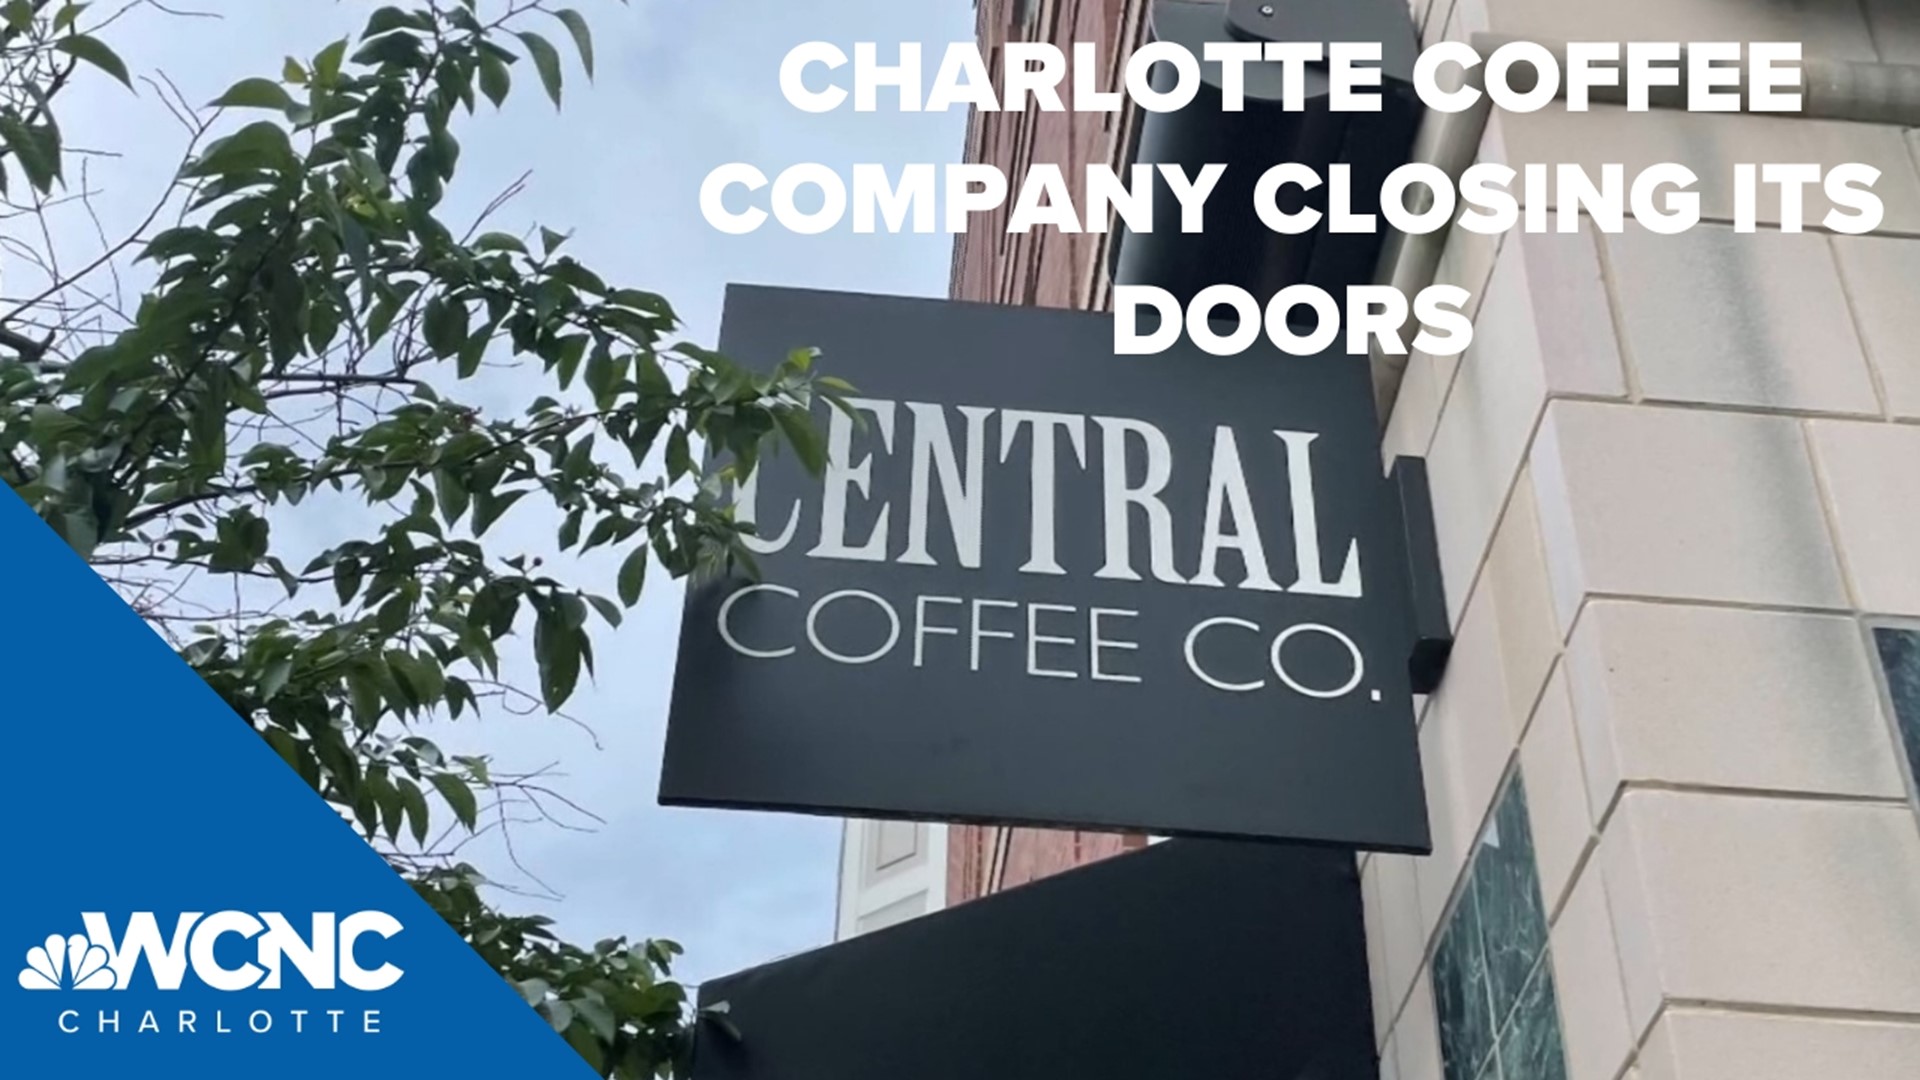 May 16 will be the last day for Central Coffee Co. in South End.